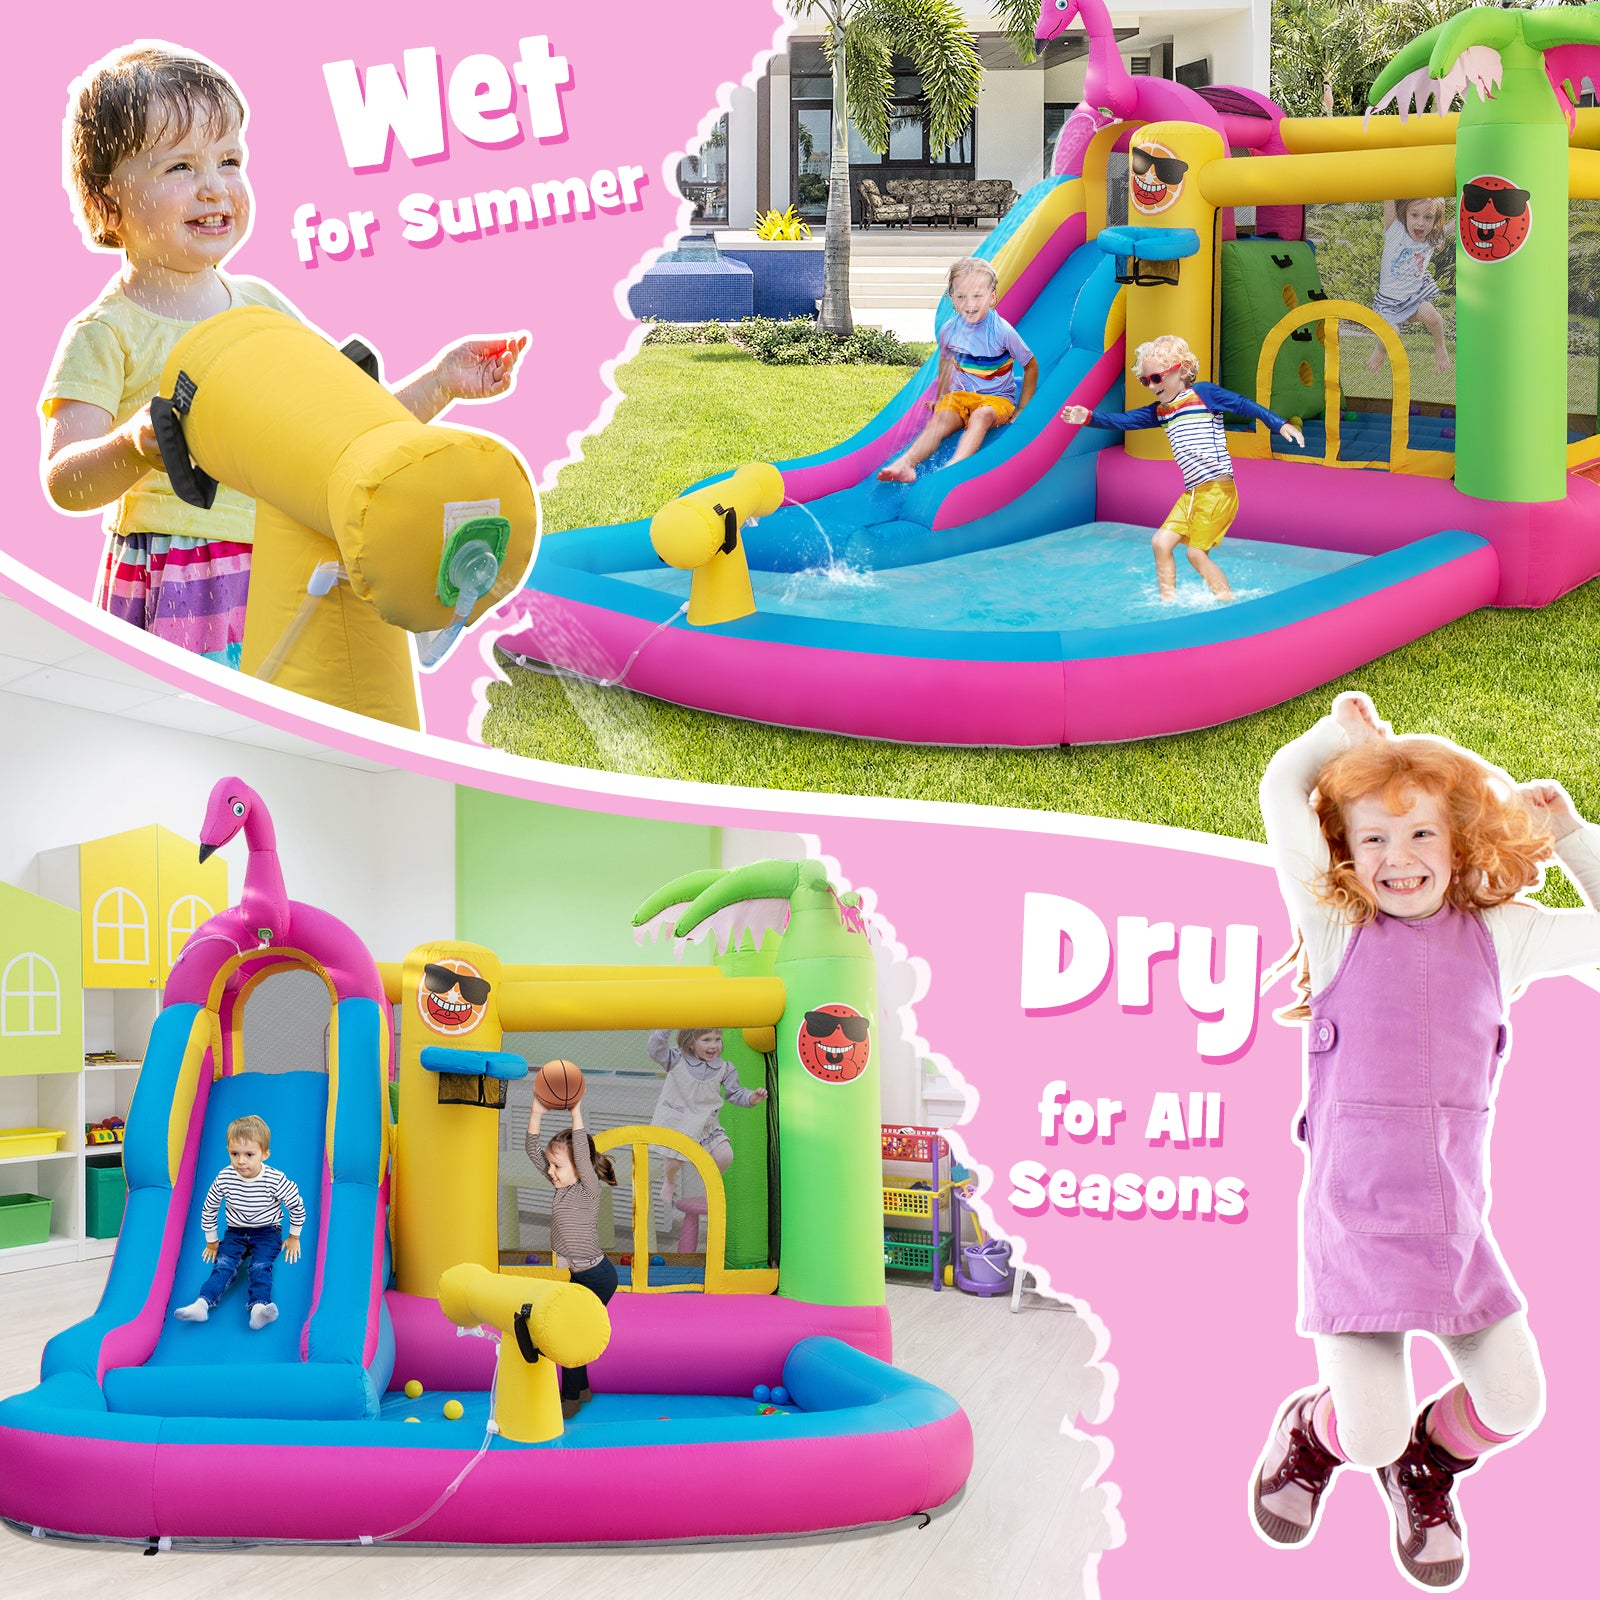 2-in-1 Ways to Play: Watch as your kids embark on thrilling adventures, sliding down the refreshing water slide and splashing into the spacious pool during hot summer days. The included water cannon adds even more excitement. On dry days, they can bounce and enjoy ball shooting fun.